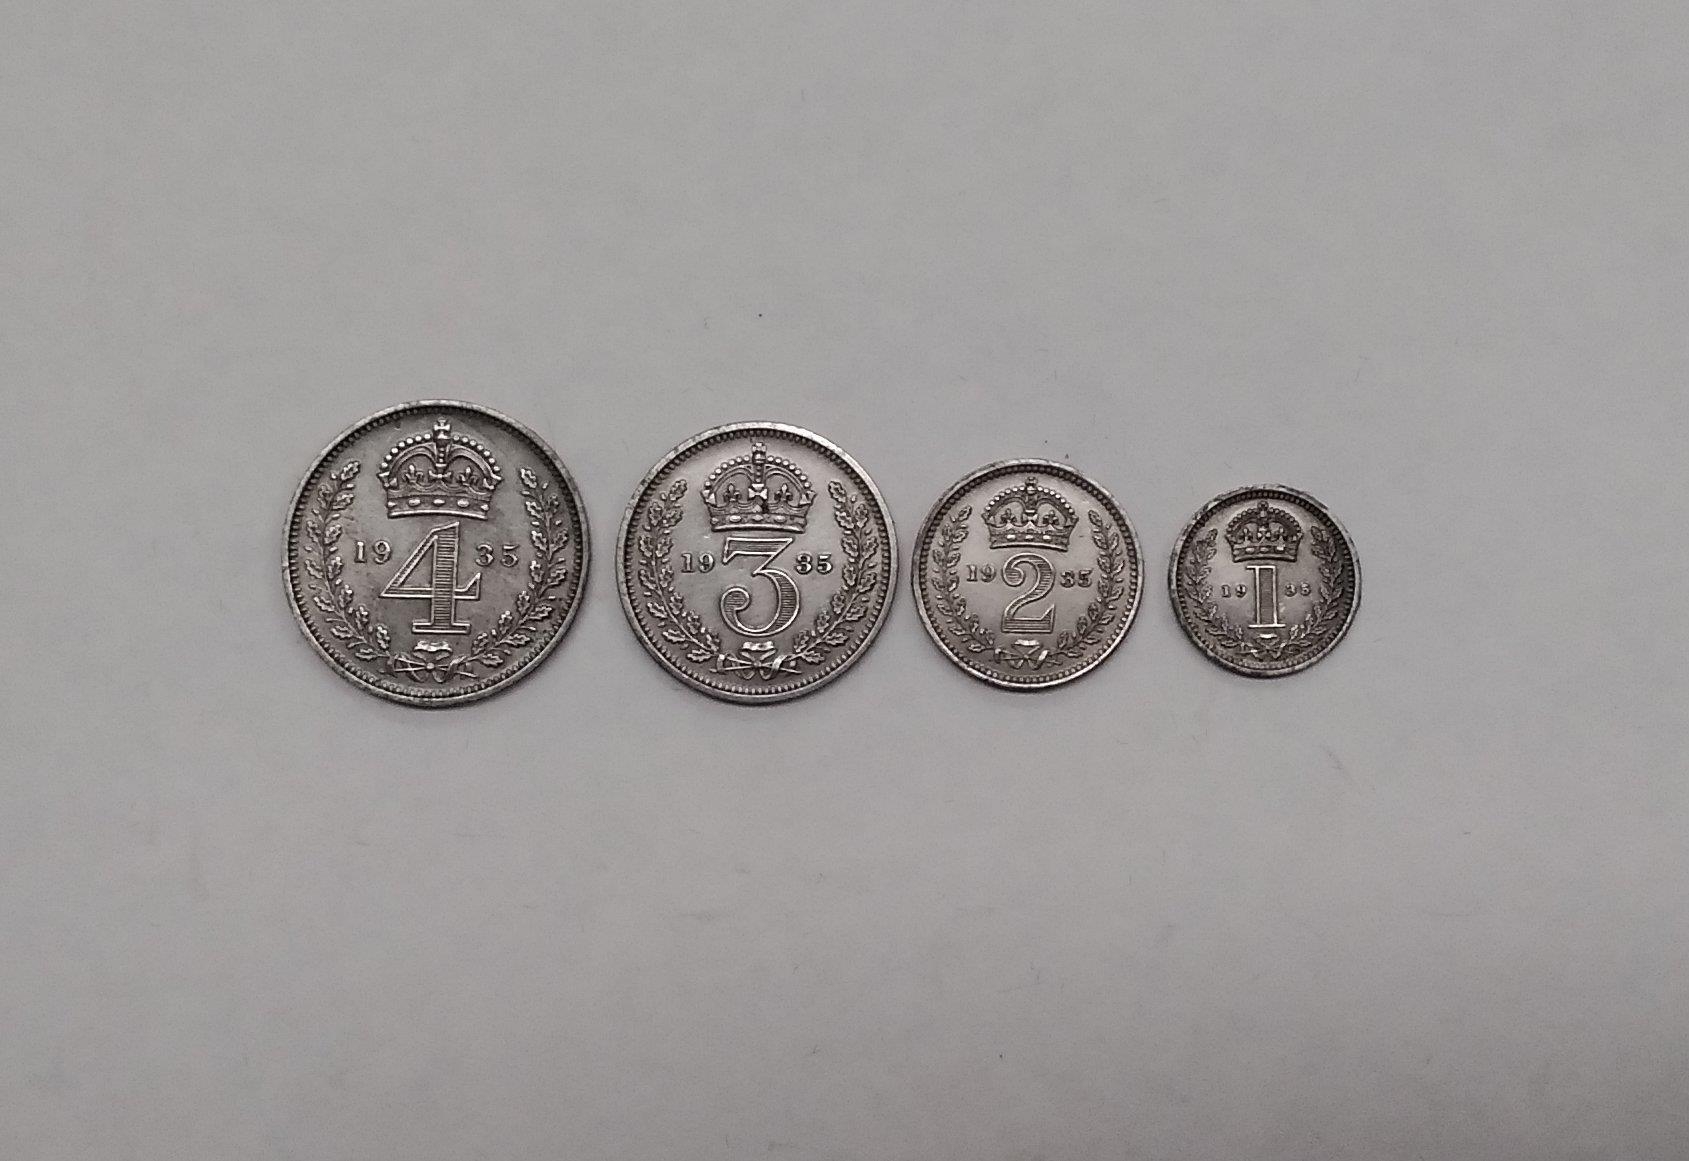 A George V (1910-1936) 1935 Maundy set in a modern Coincraft case - Image 2 of 2